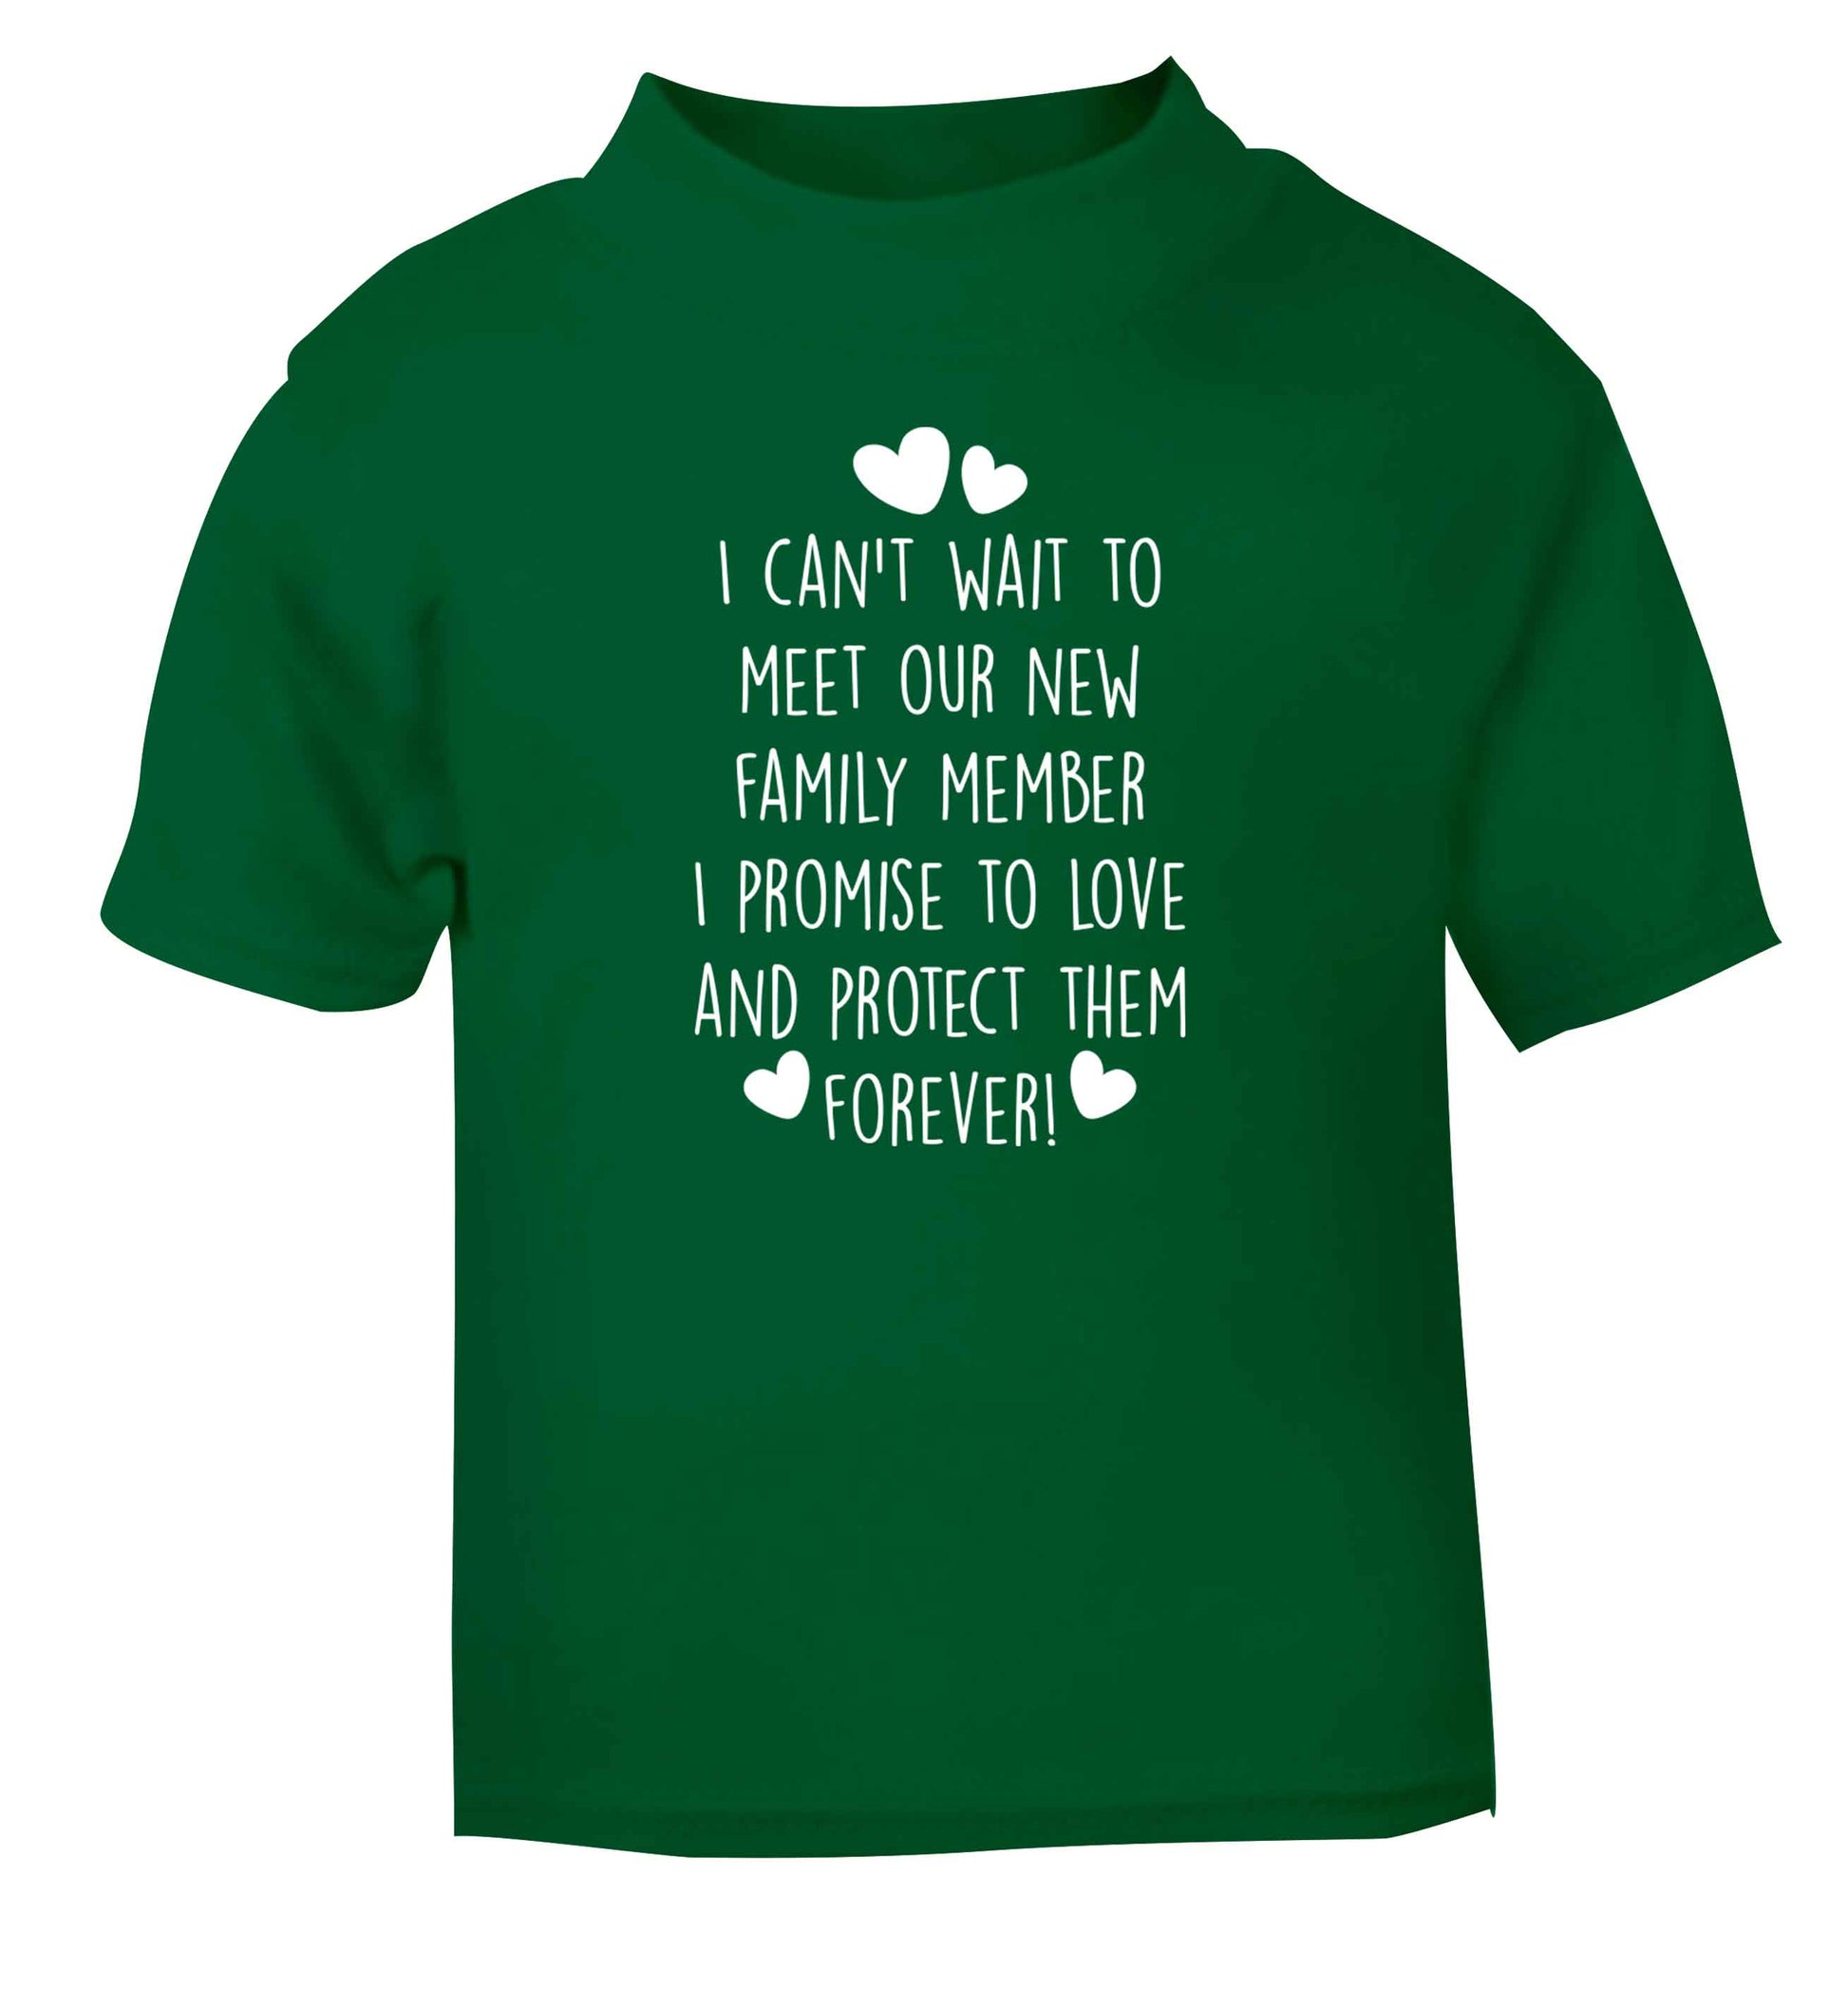 I can't wait to meet our new family member I promise to love and protect them forevergreen Baby Toddler Tshirt 2 Years